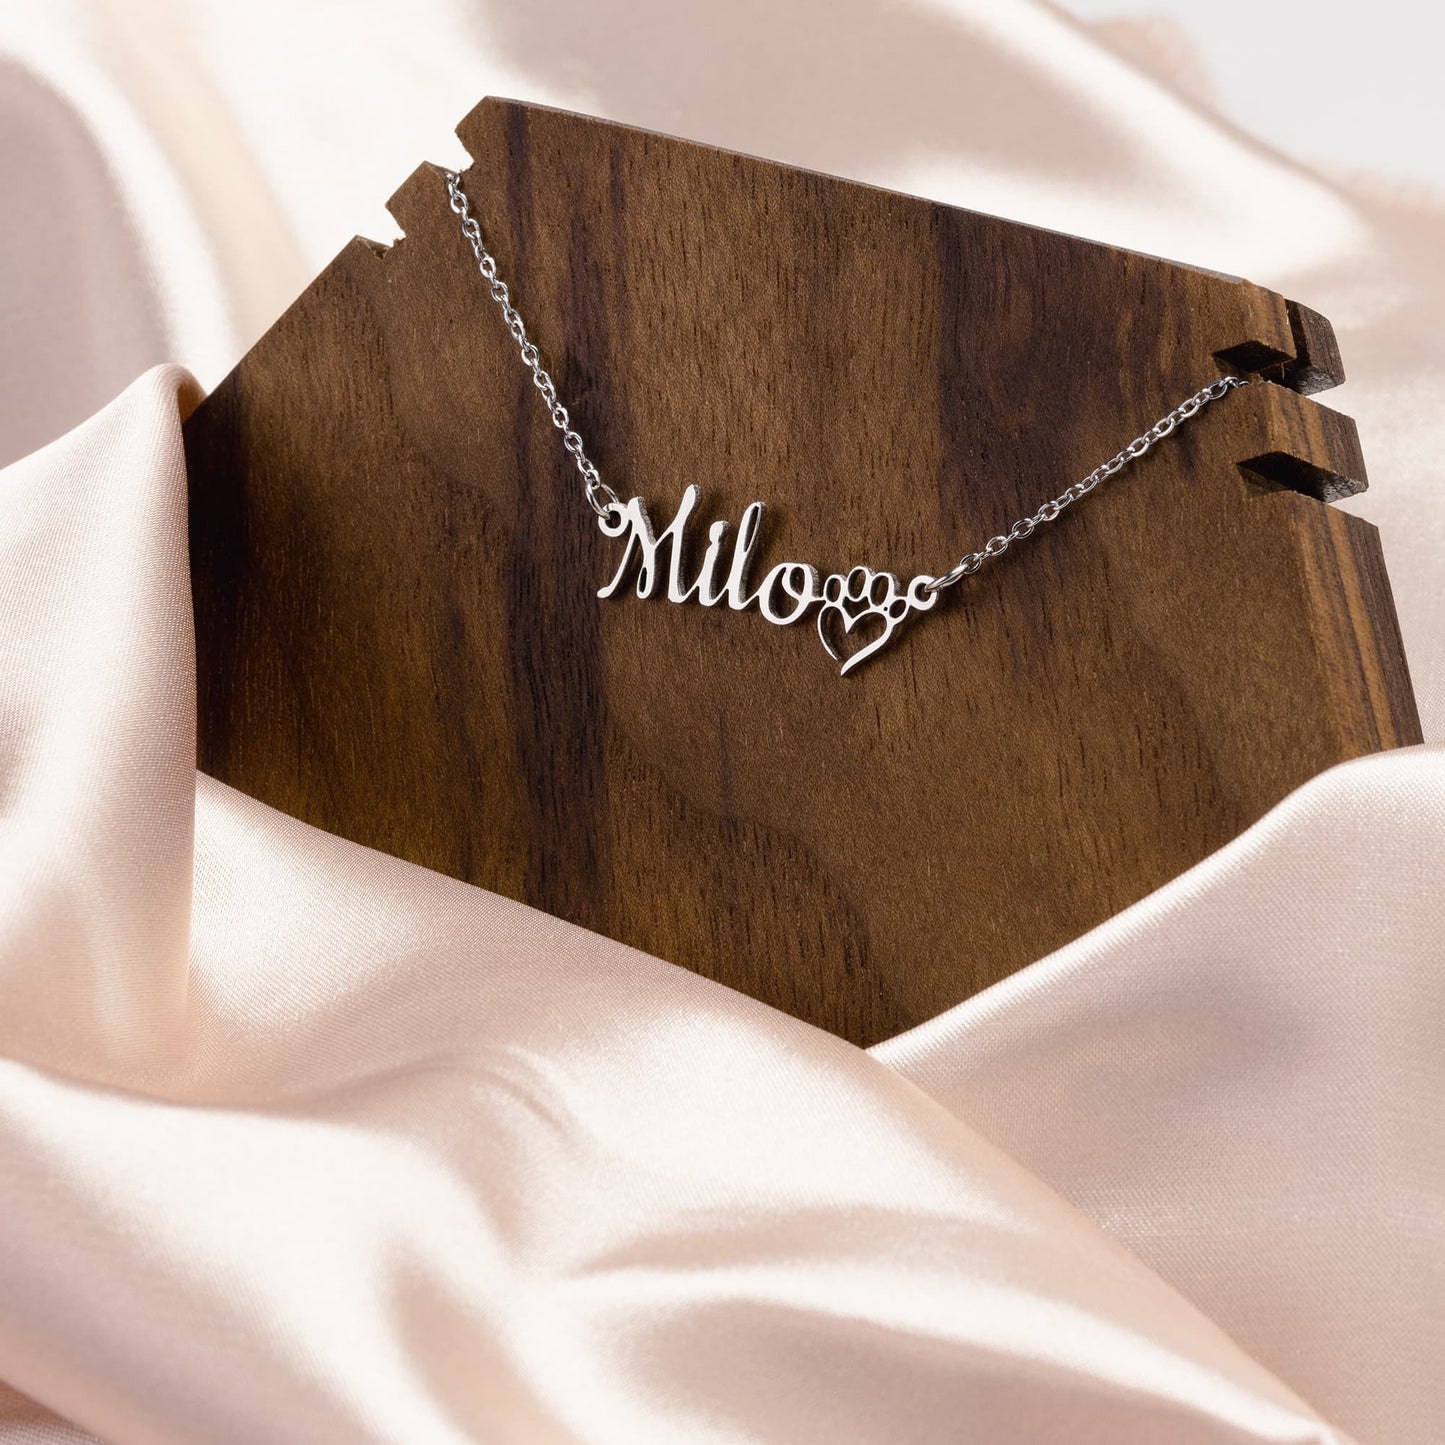 The perfect personalized gift for the favorite dog mom in your life. Proudly made in the USA using American Steel.